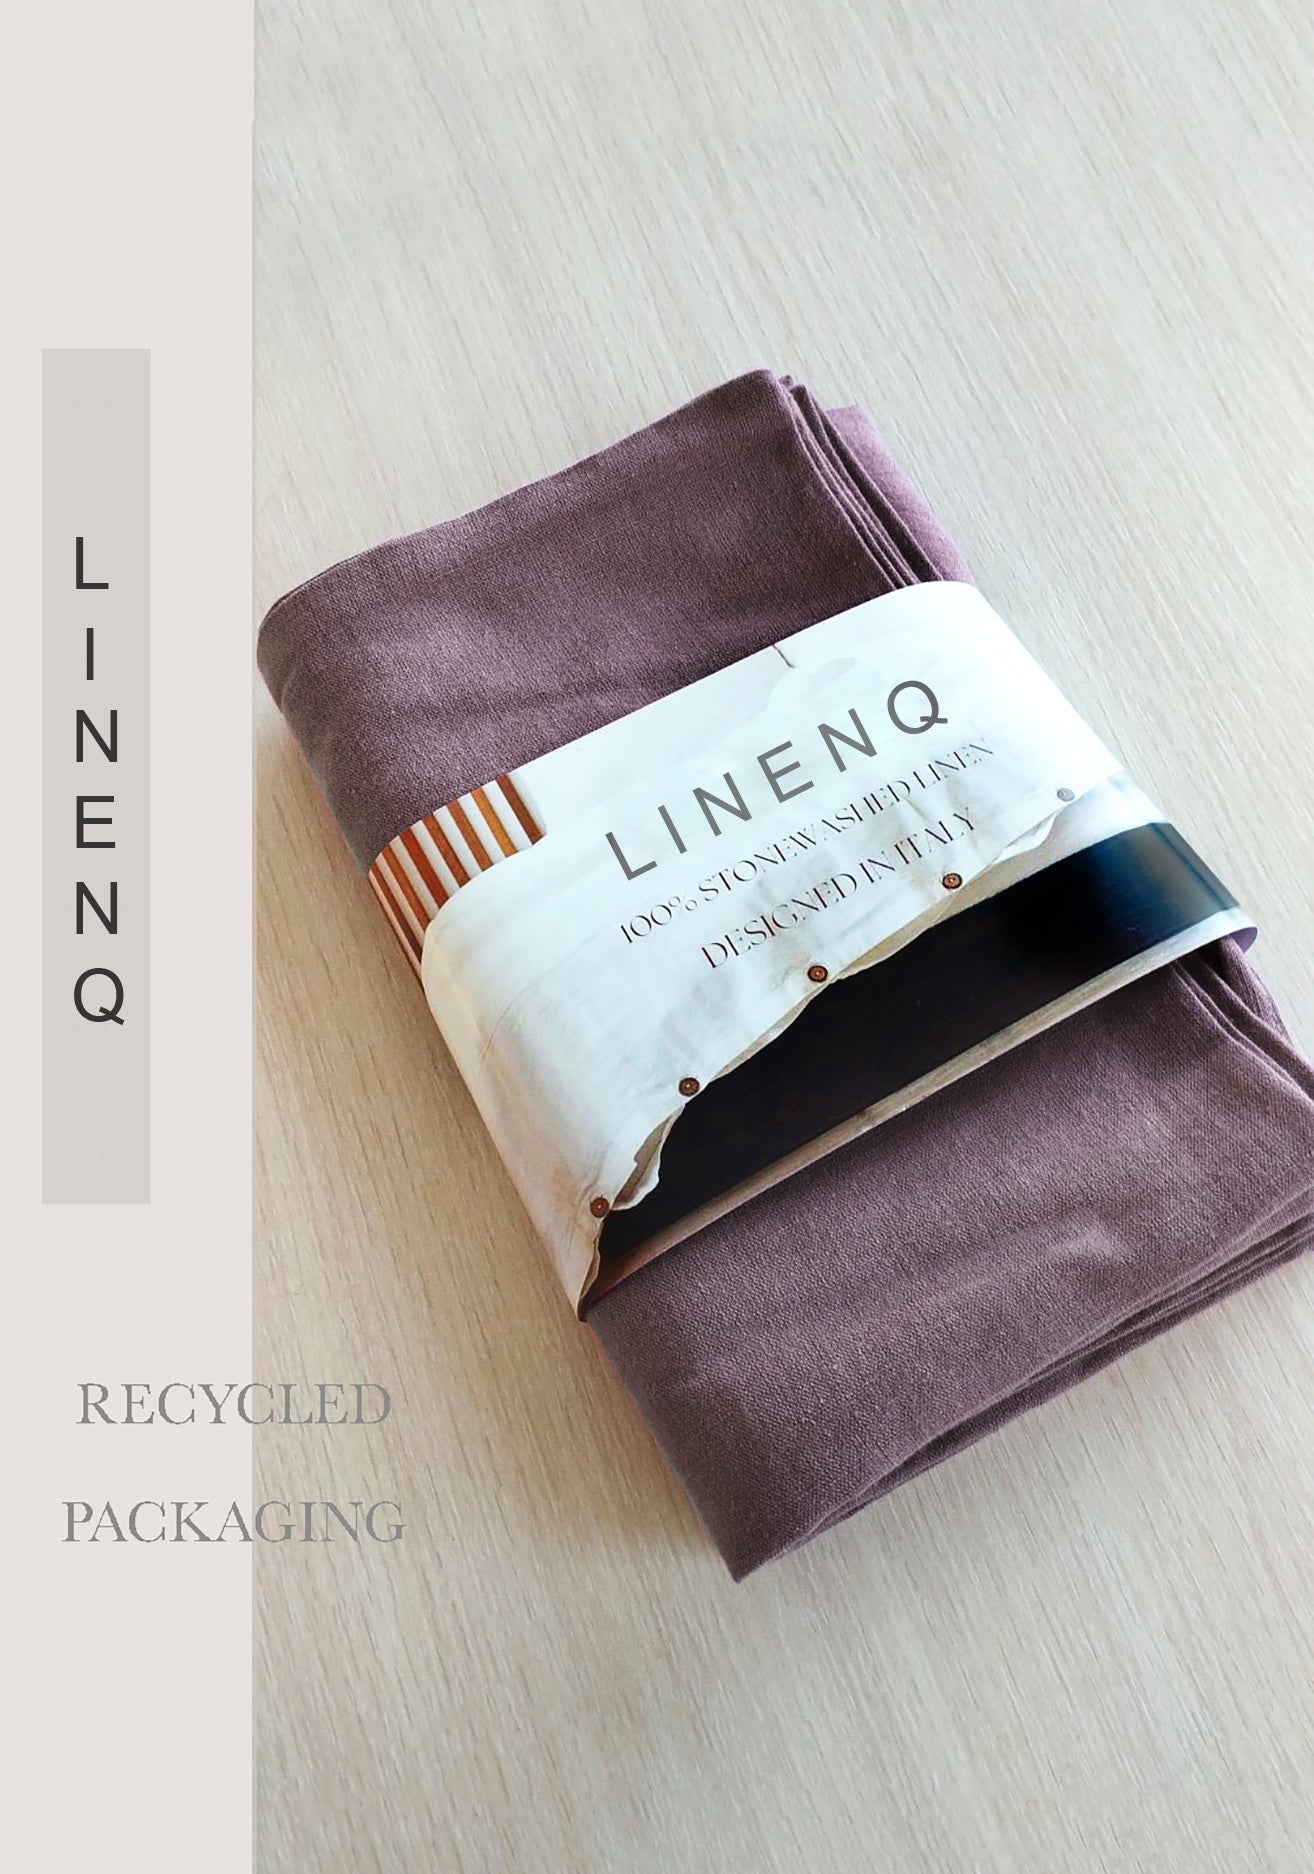 Linen fitted sheet in Full, Queen, King sizes